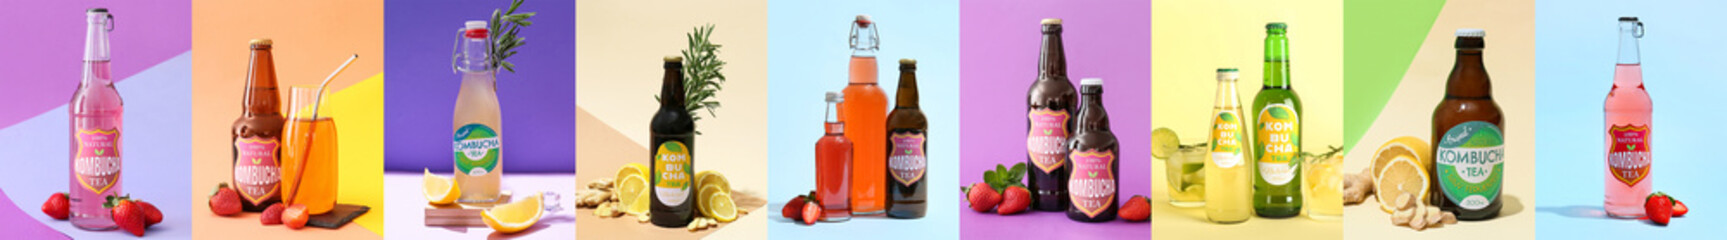 Collage of bottles with fresh kombucha drink on color background